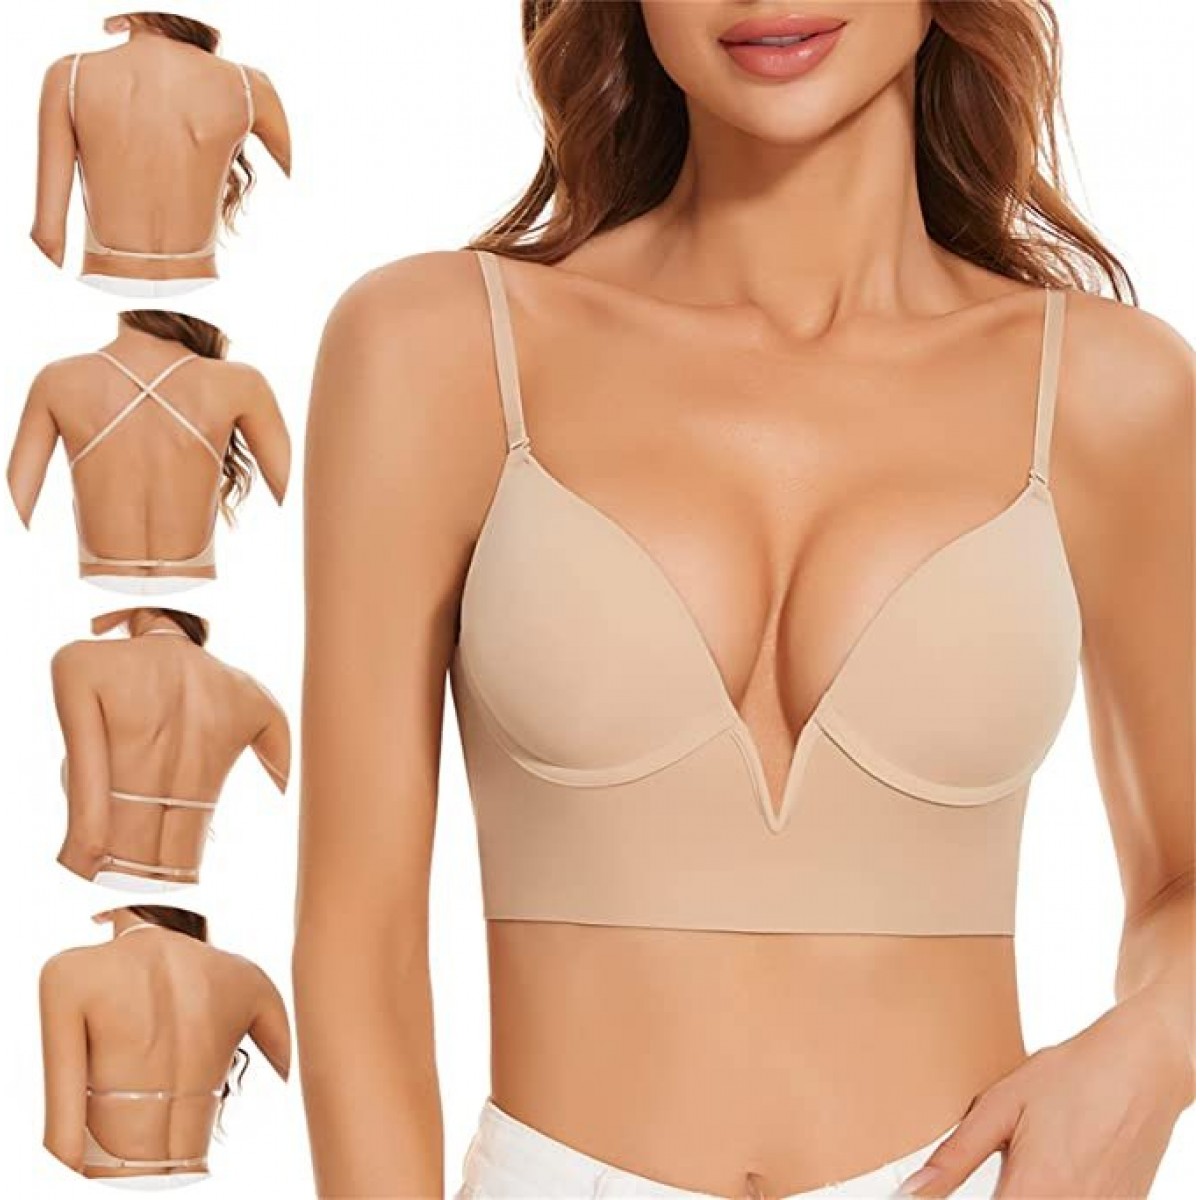 Uoolerp Low Back Bras For Womensexy Deep V Plunge Invisible Backless Brasseamless Low Cut 8252